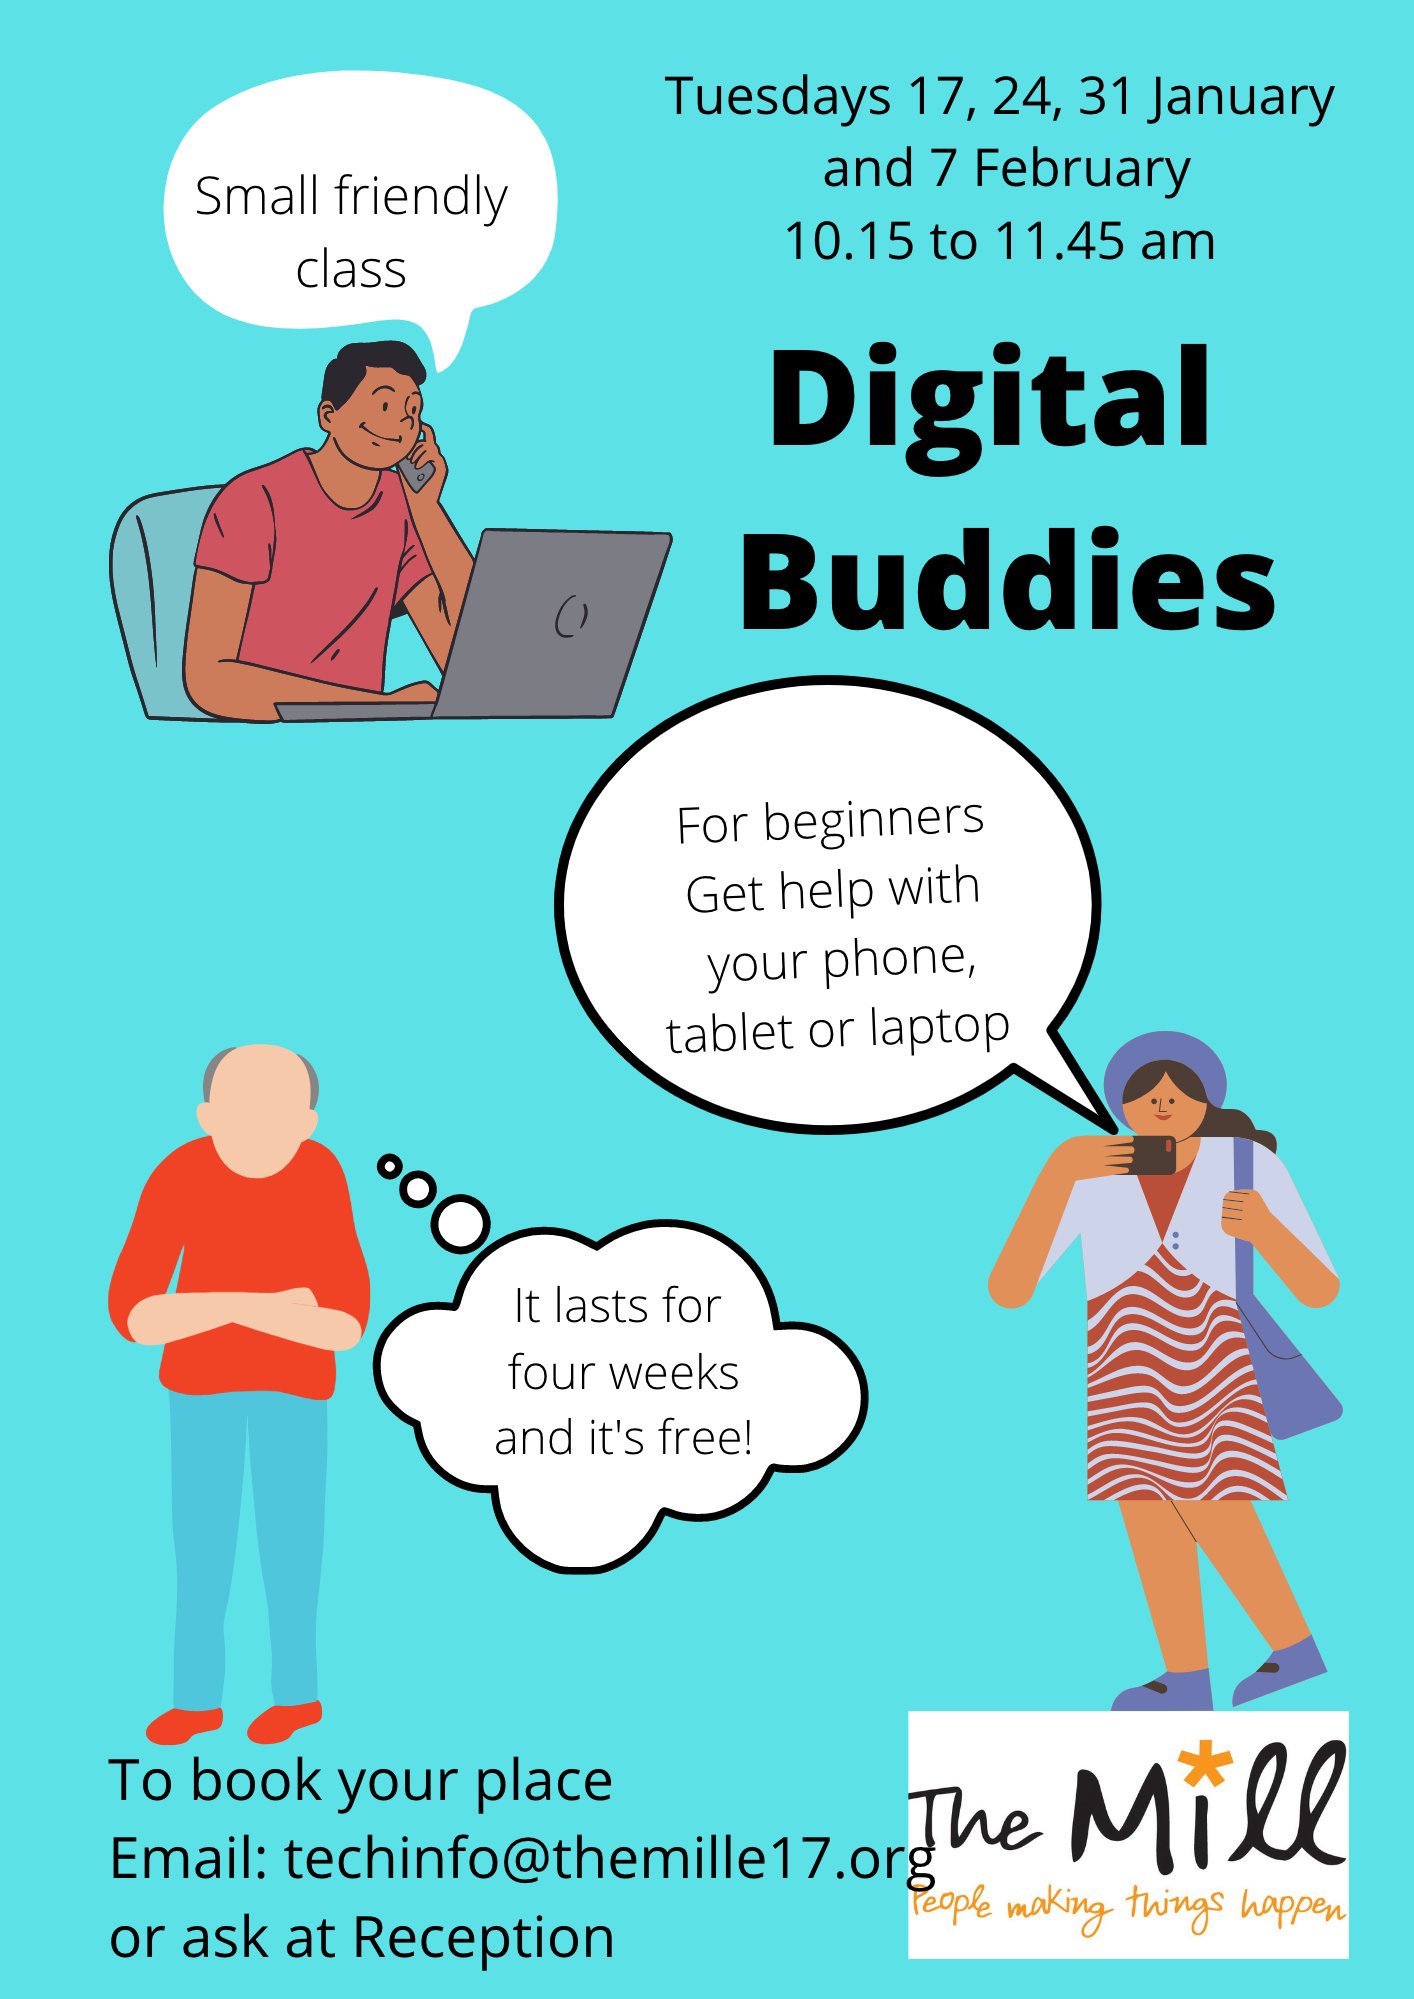 Digital Buddies - everything you wanted to know